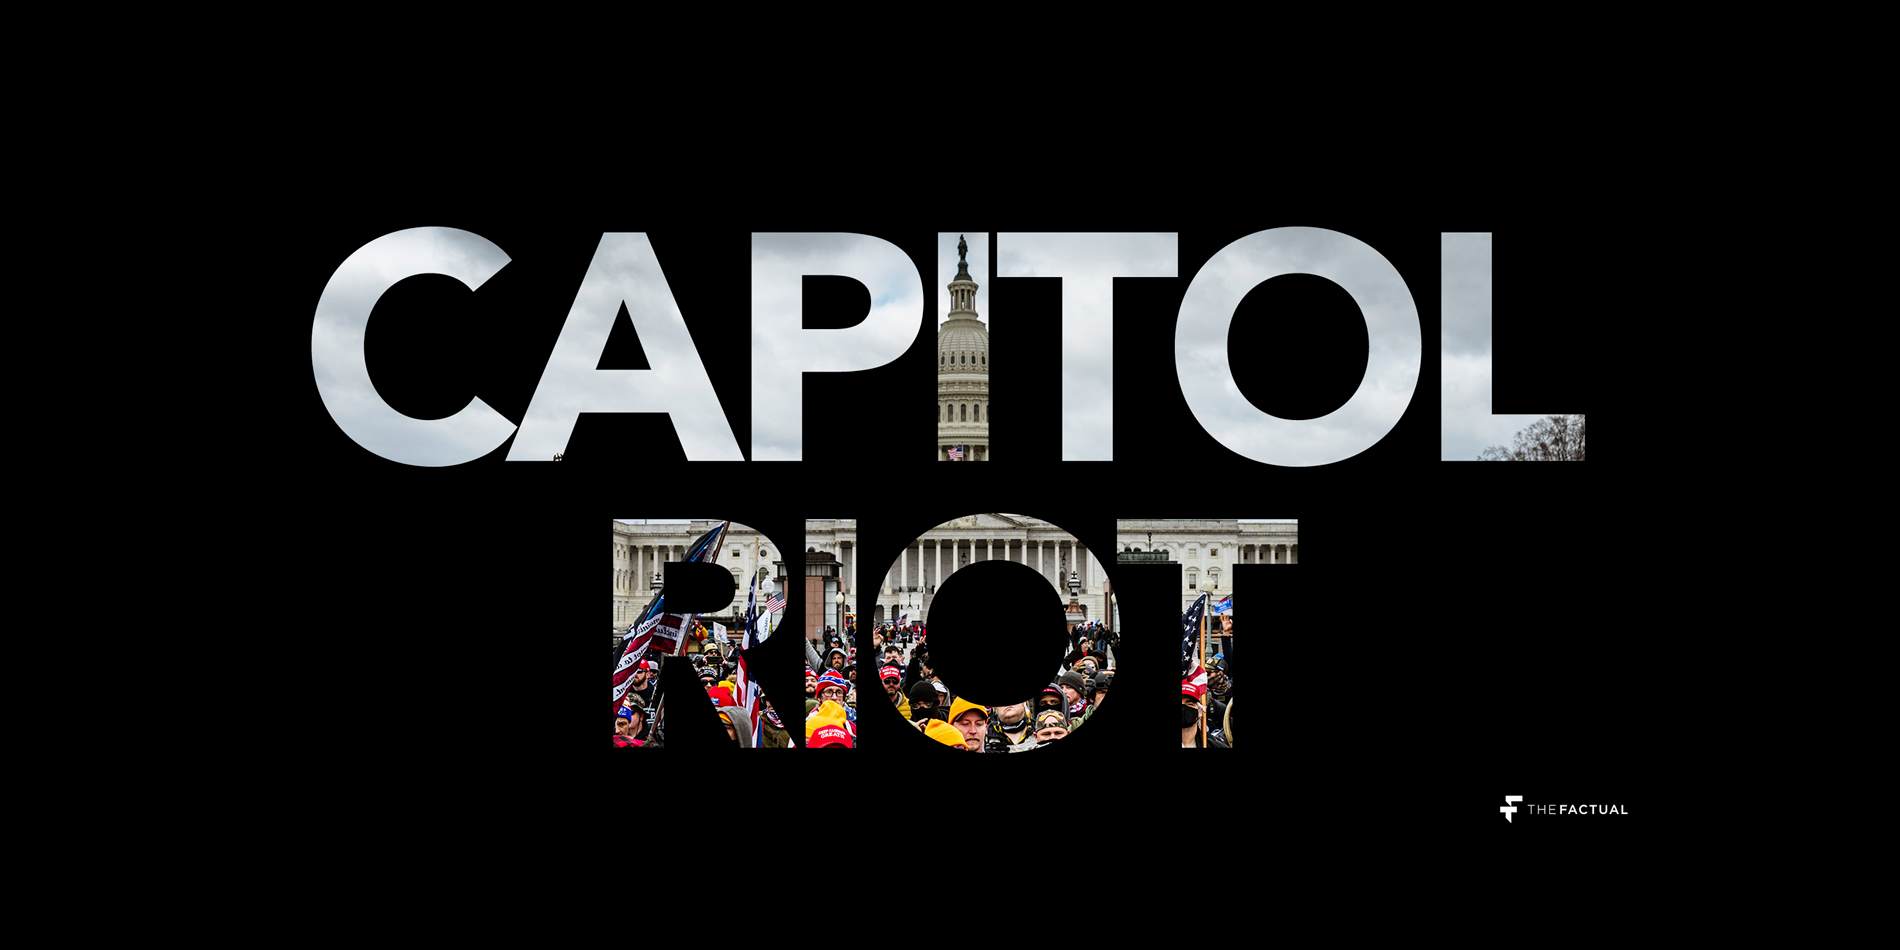 Insurrection, Siege, Riot: The Words Used to Describe the January 6 Capitol Attack